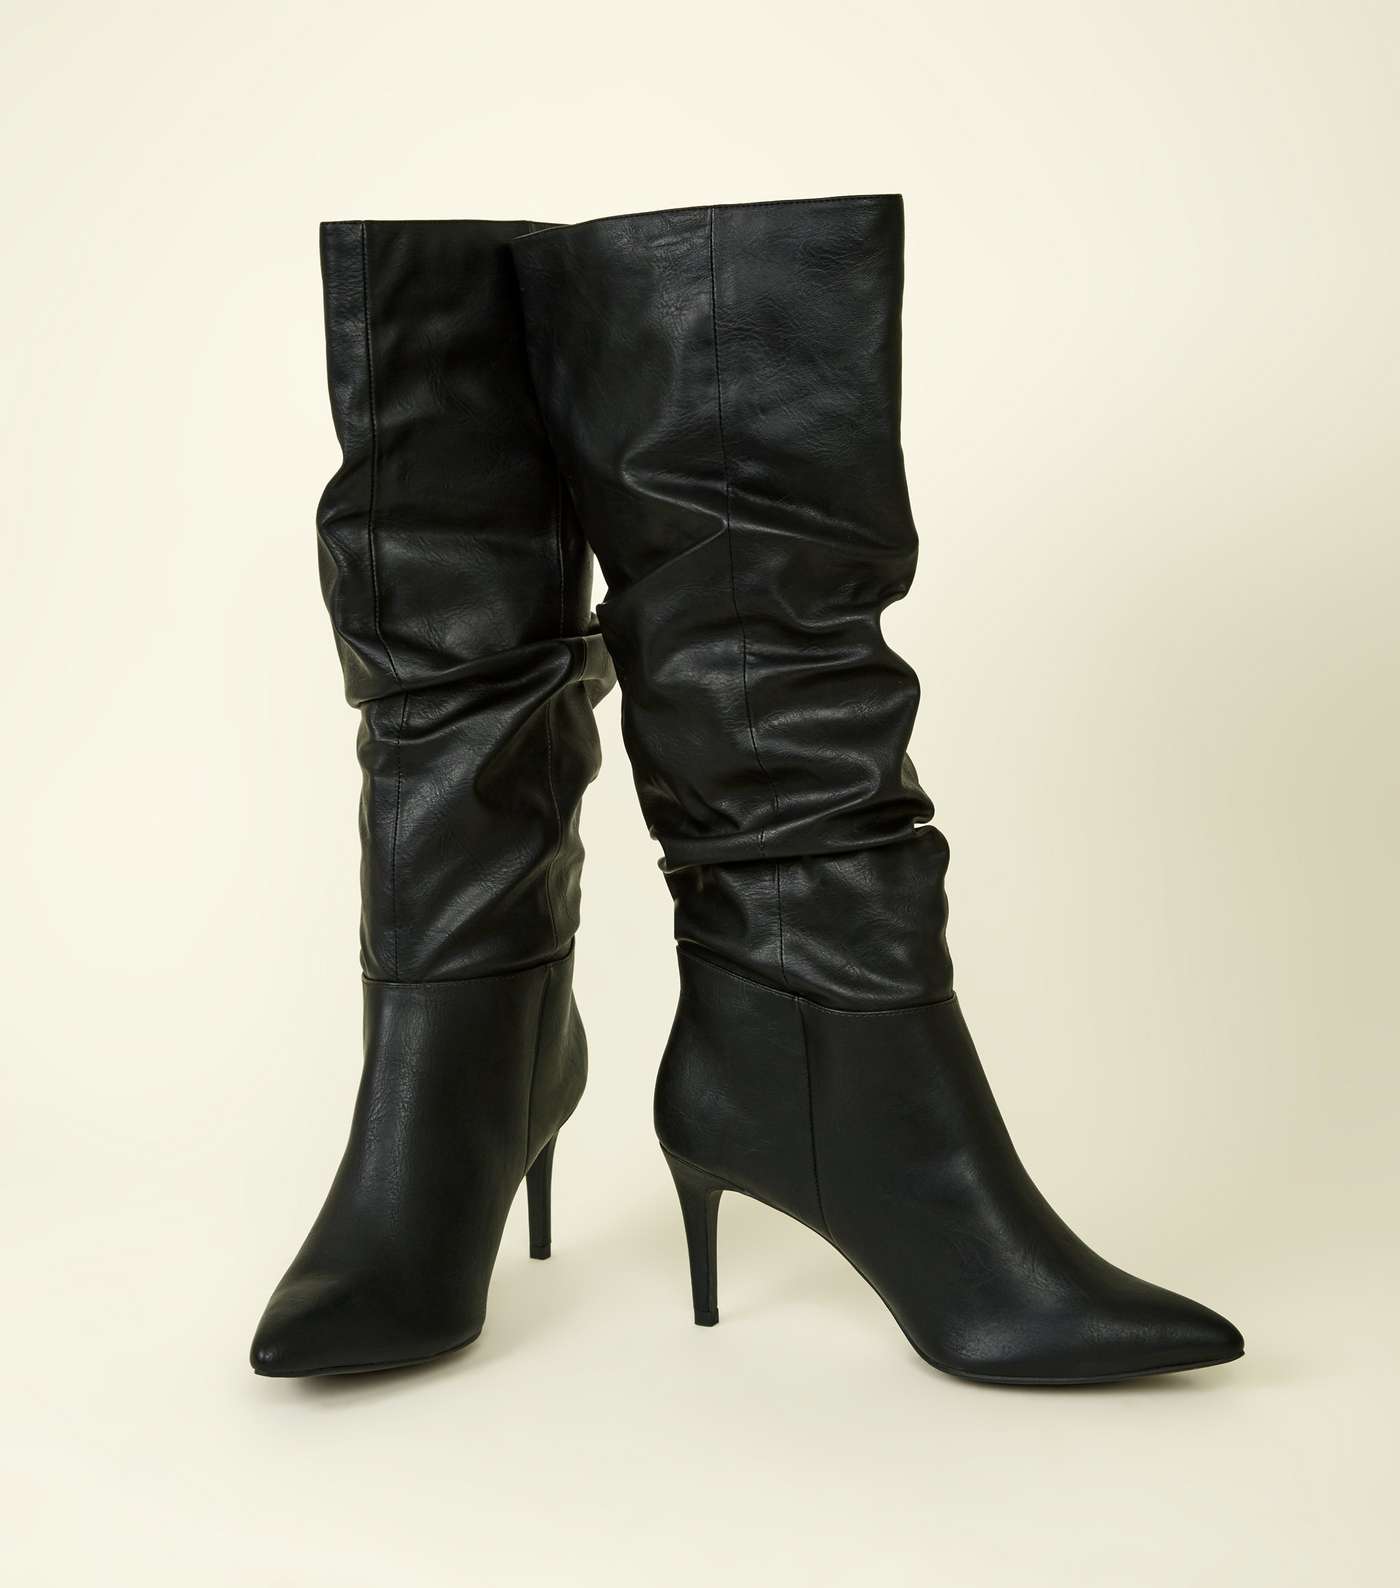 Black Leather-Look Knee High Stiletto Slouch Boots Image 4